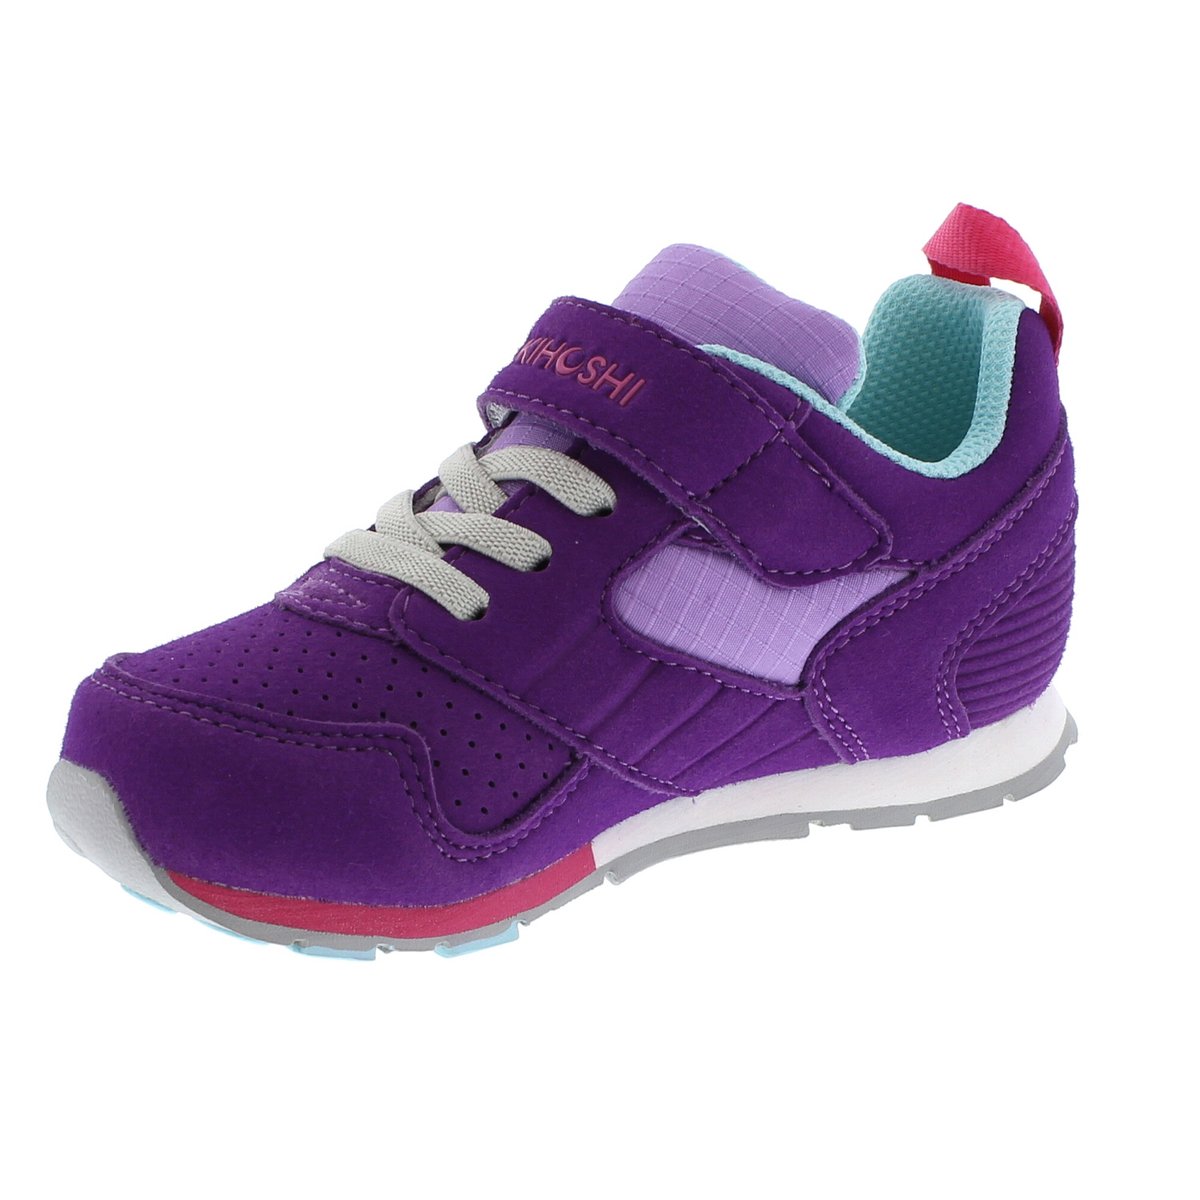 Child Tsukihoshi Racer Sneaker in Purple/Lavender from the front view